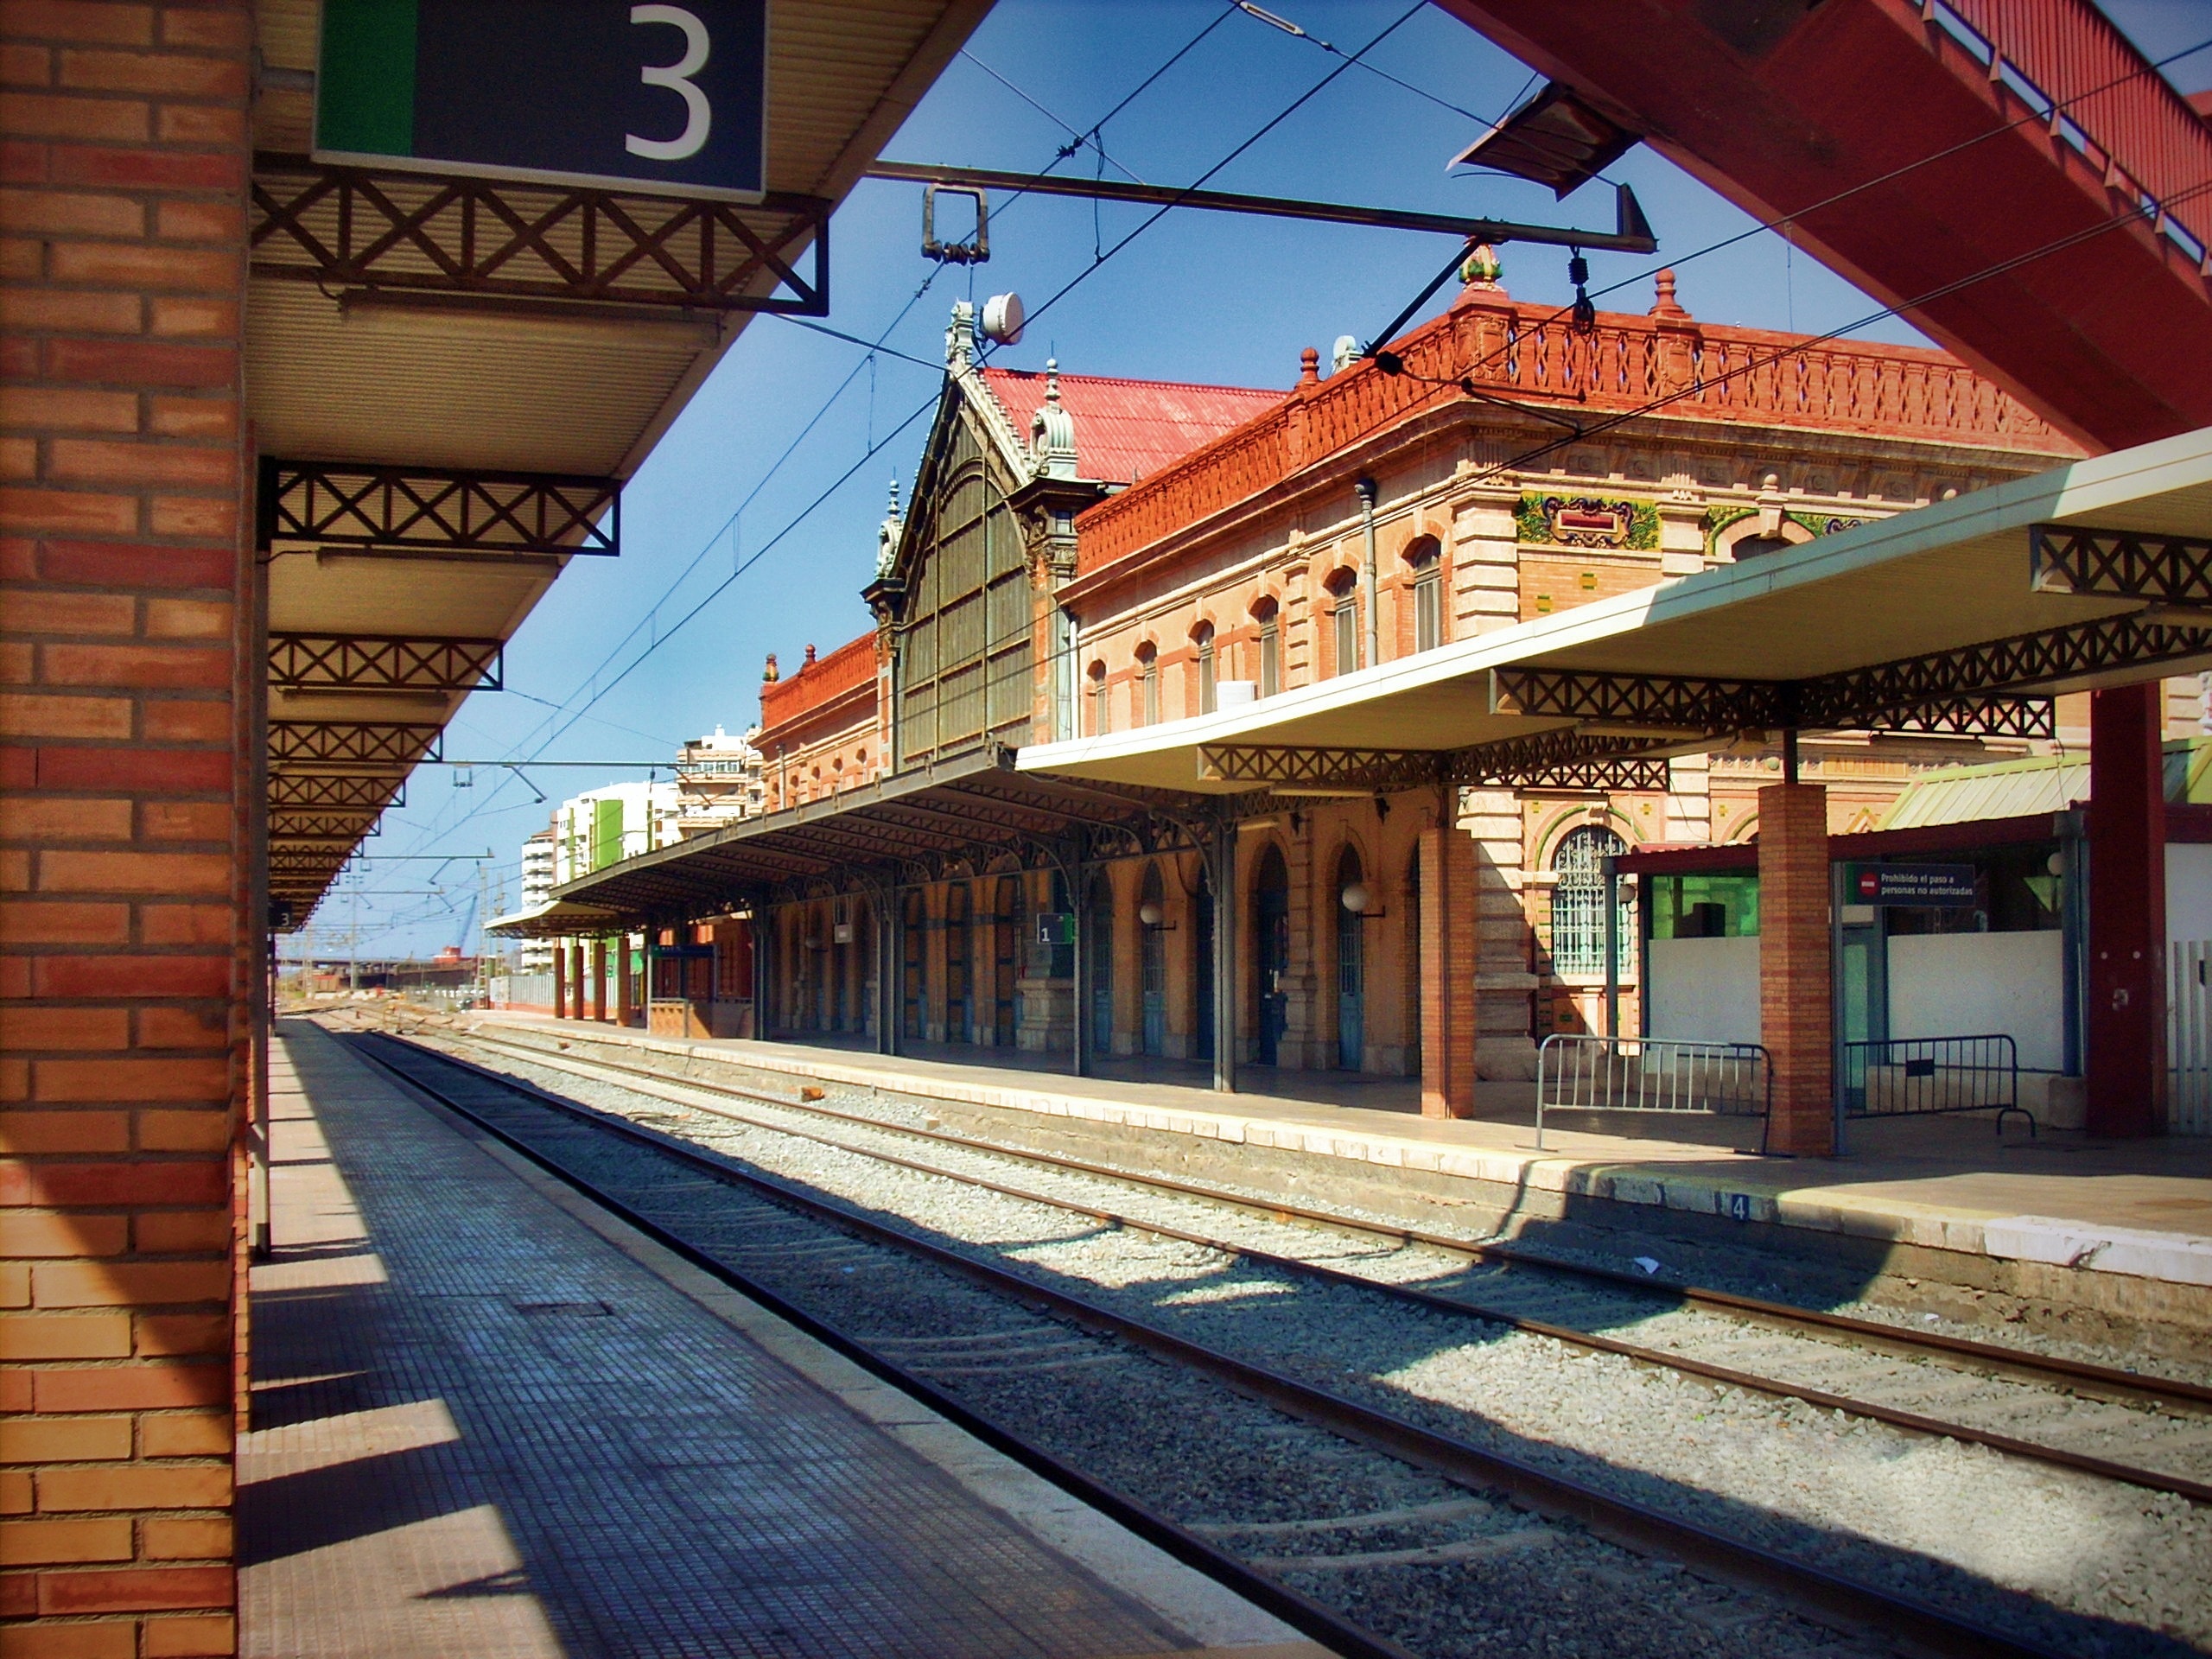 white and brown train station in front of railway during daytime